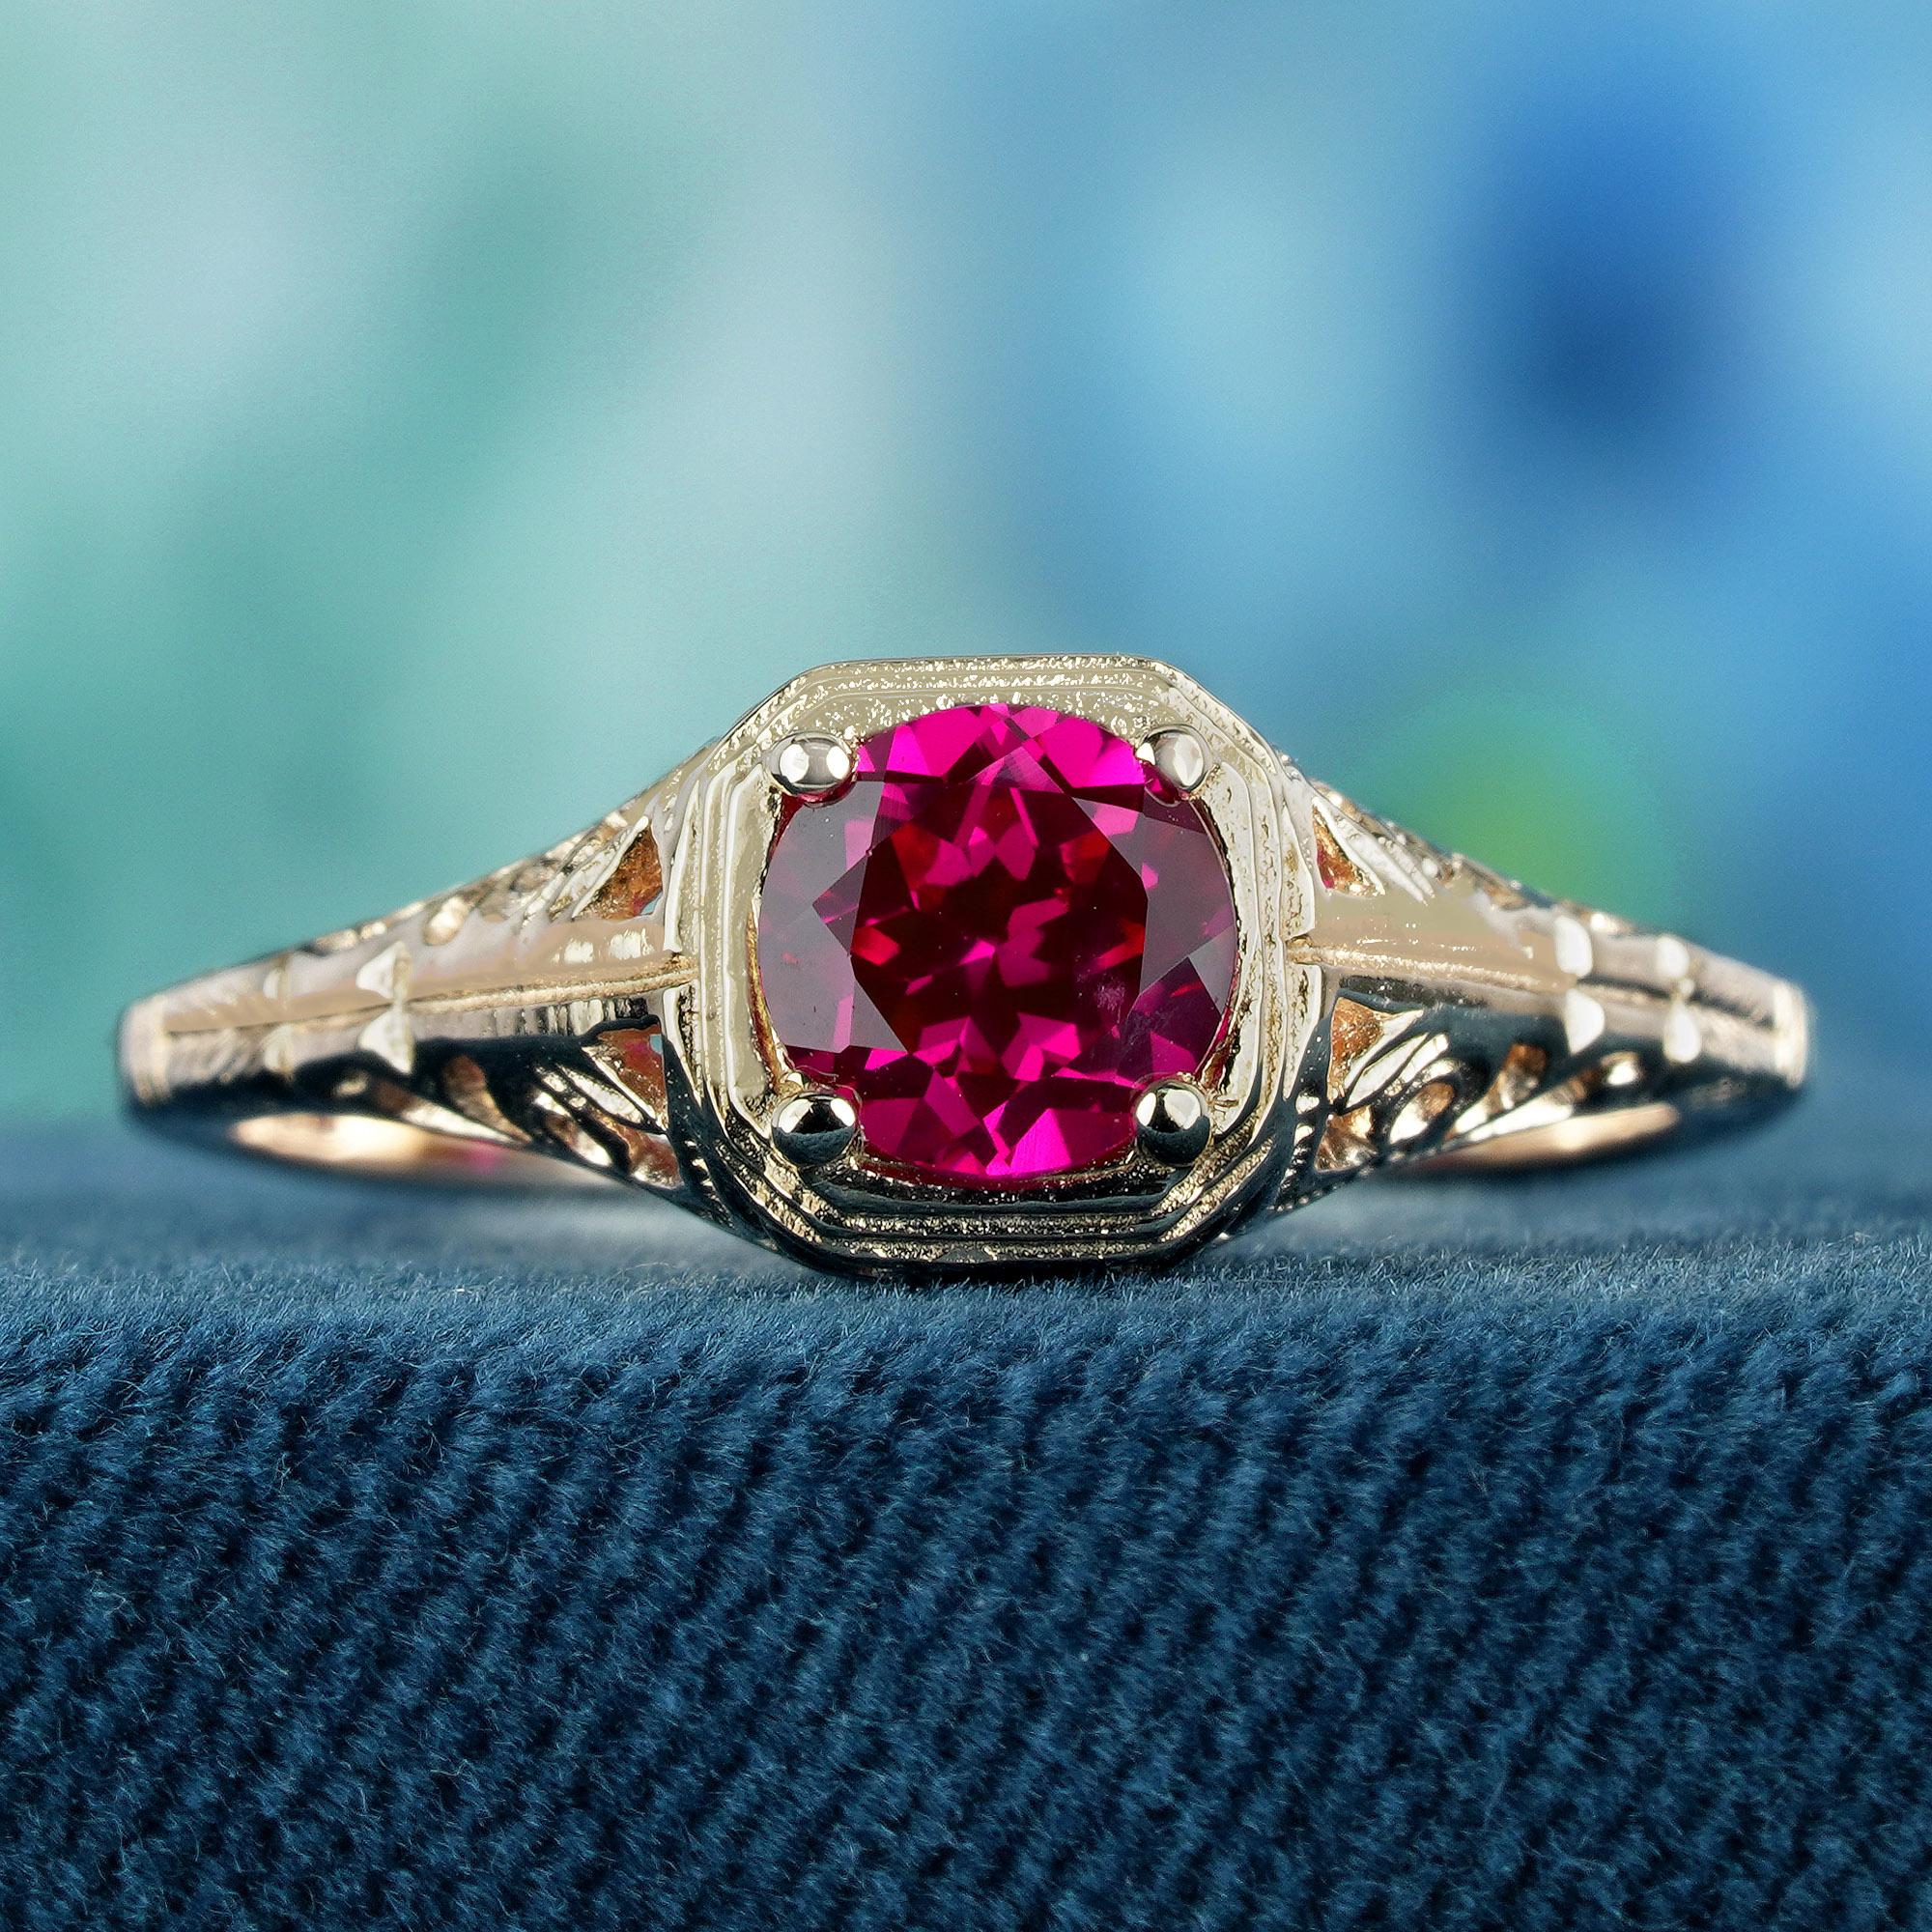 Behold a timeless treasure from a bygone era. Our exquisite ring glimmers with the ethereal allure of a natural ruby, its faceted surface capturing light and radiating an inner luminescence. Delicately encircled by a web of filigree dancing across